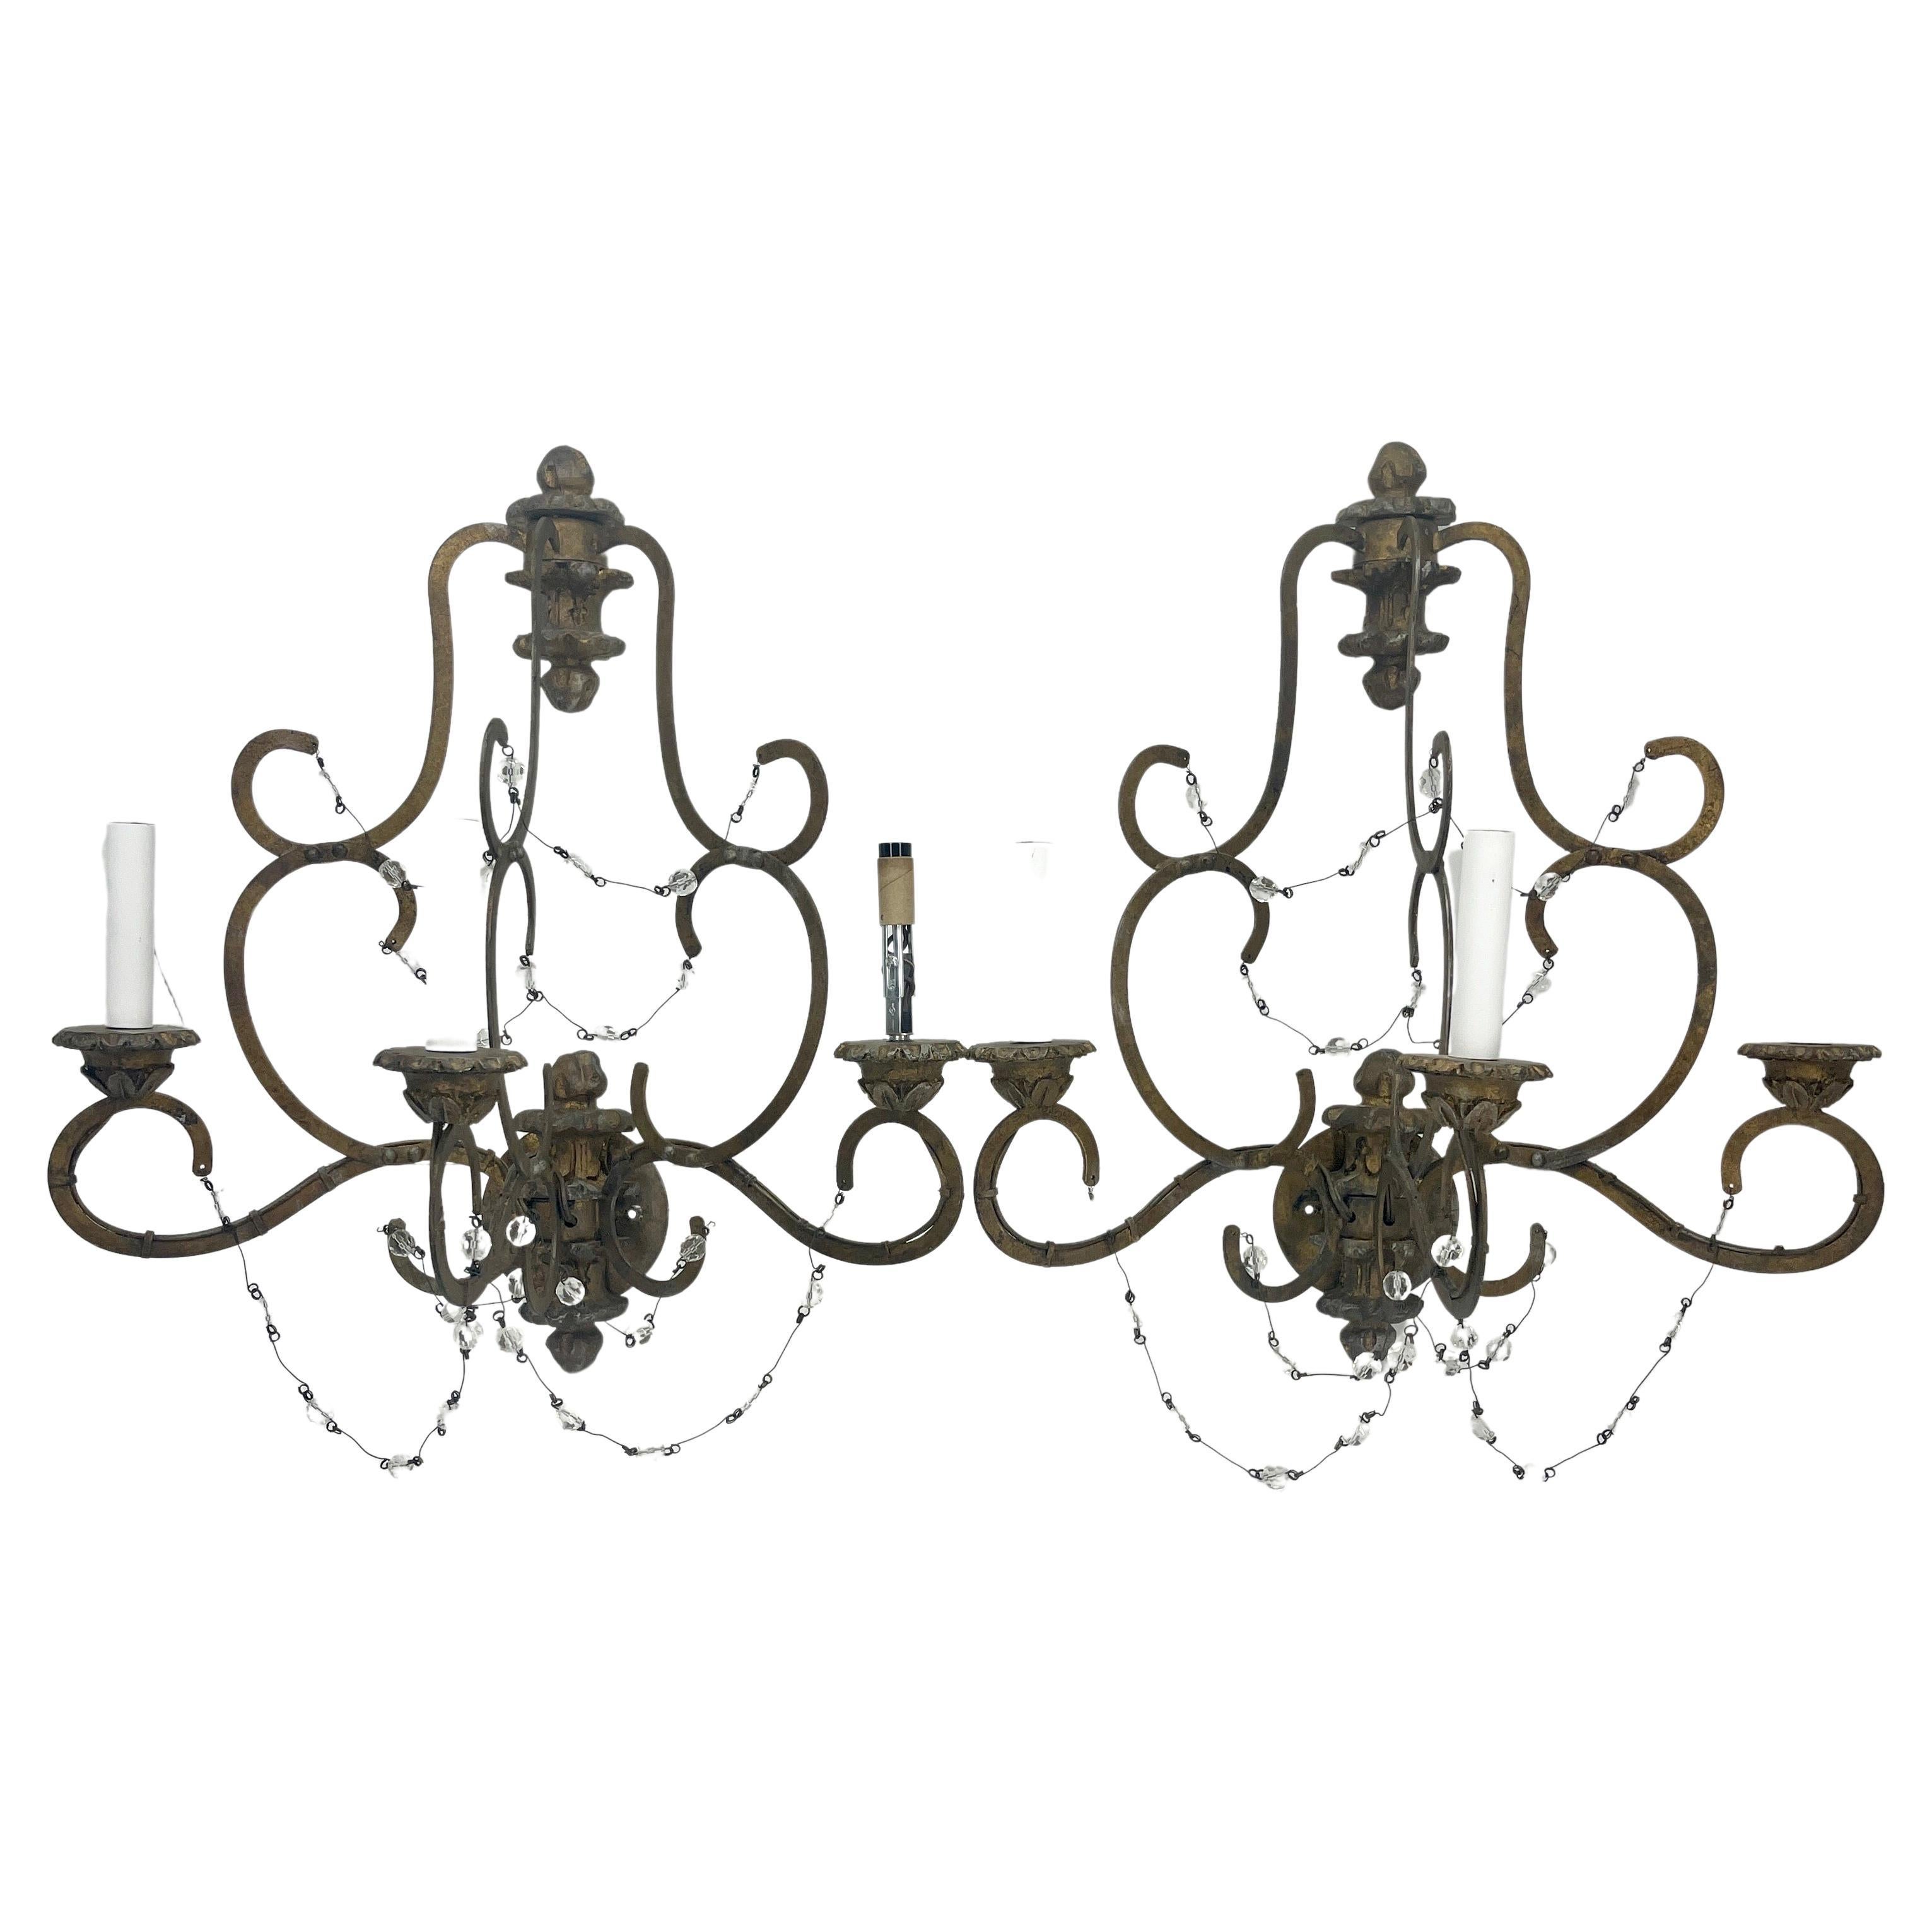 Pair of Niermann Weeks Avignon 3 light wall sconces

The simplistic finial and graceful design make these Avignon 3 light decorative sconces from Niermann Weeks very versatile for any style home. Each sconce features a rope of unique, faceted